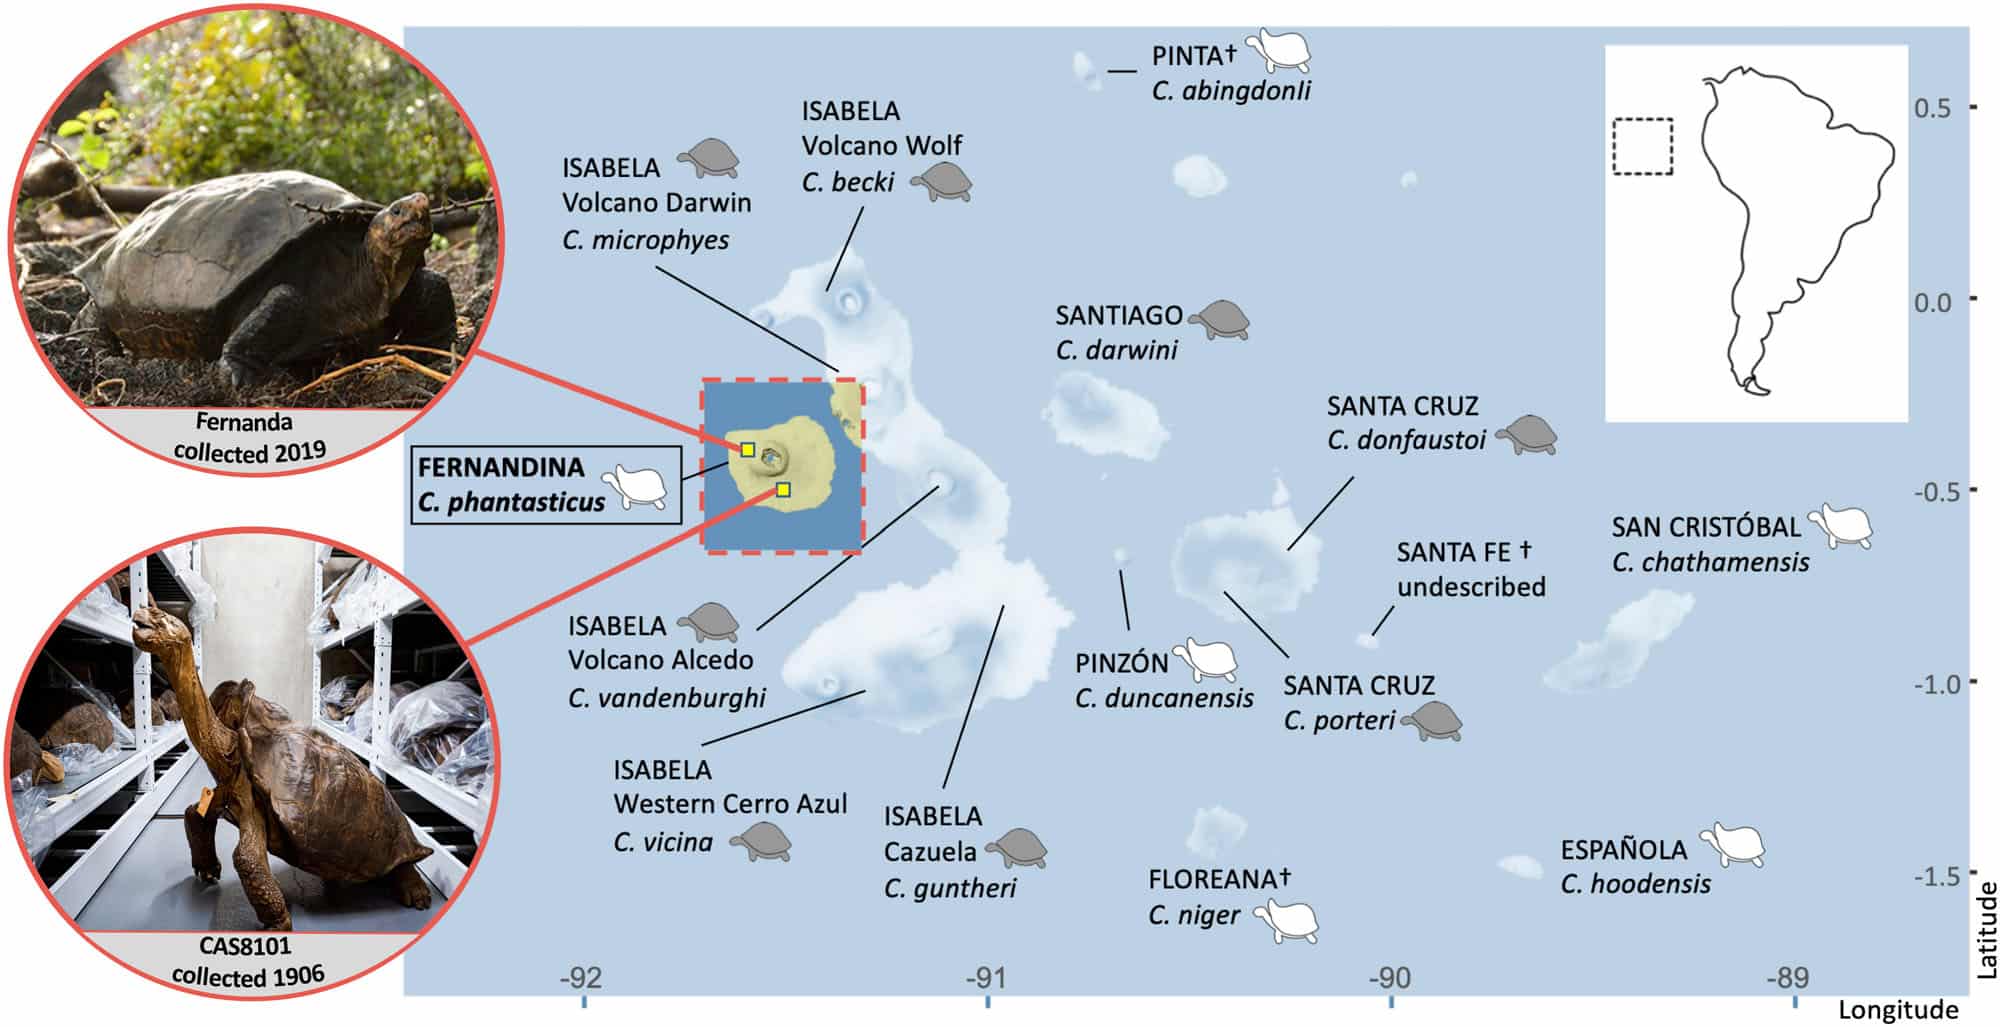 map of Galápagos islands shows close proximity of two discovered tortoises. Inset photos show living "Fernanda" and museum specimen from 1906